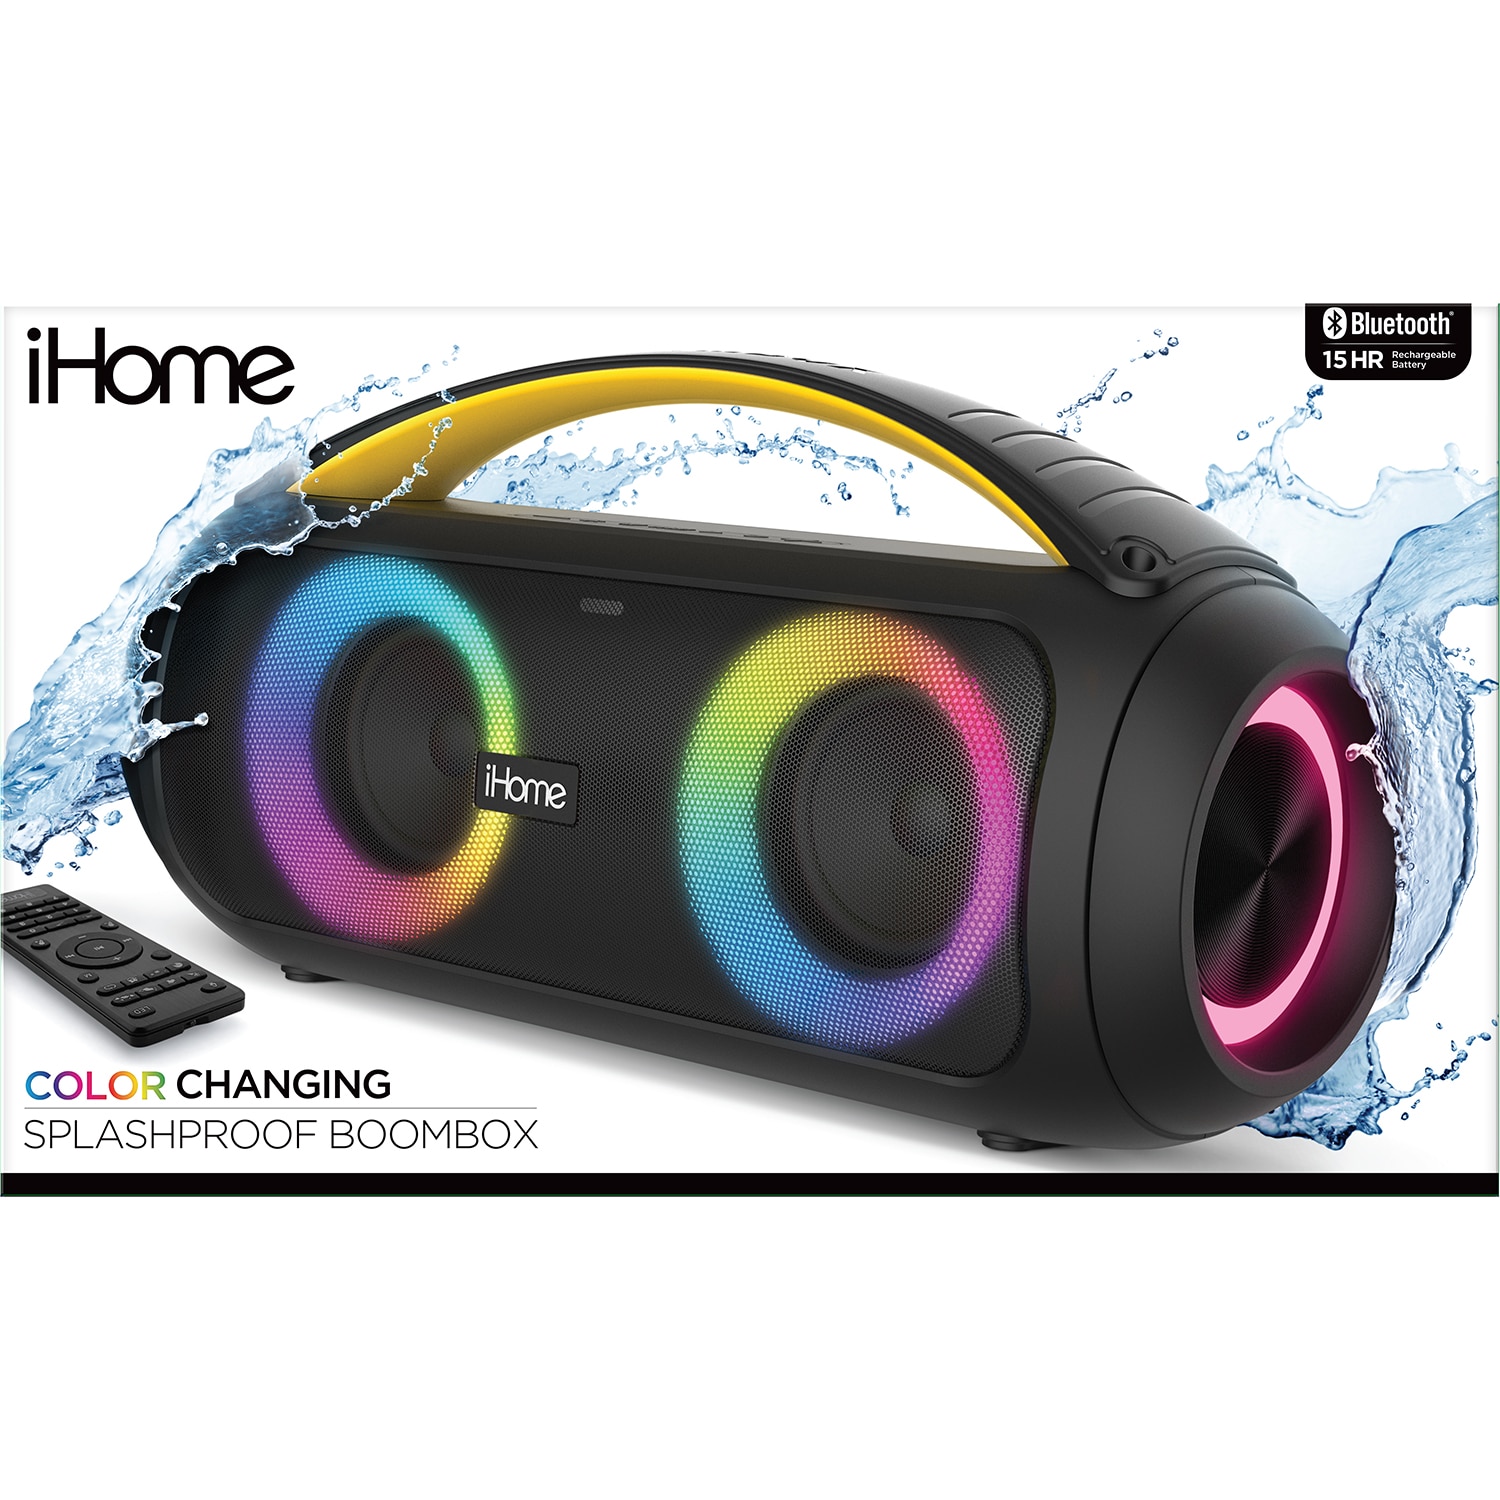 iHome Color Changing Splashproof Boombox w/Remote